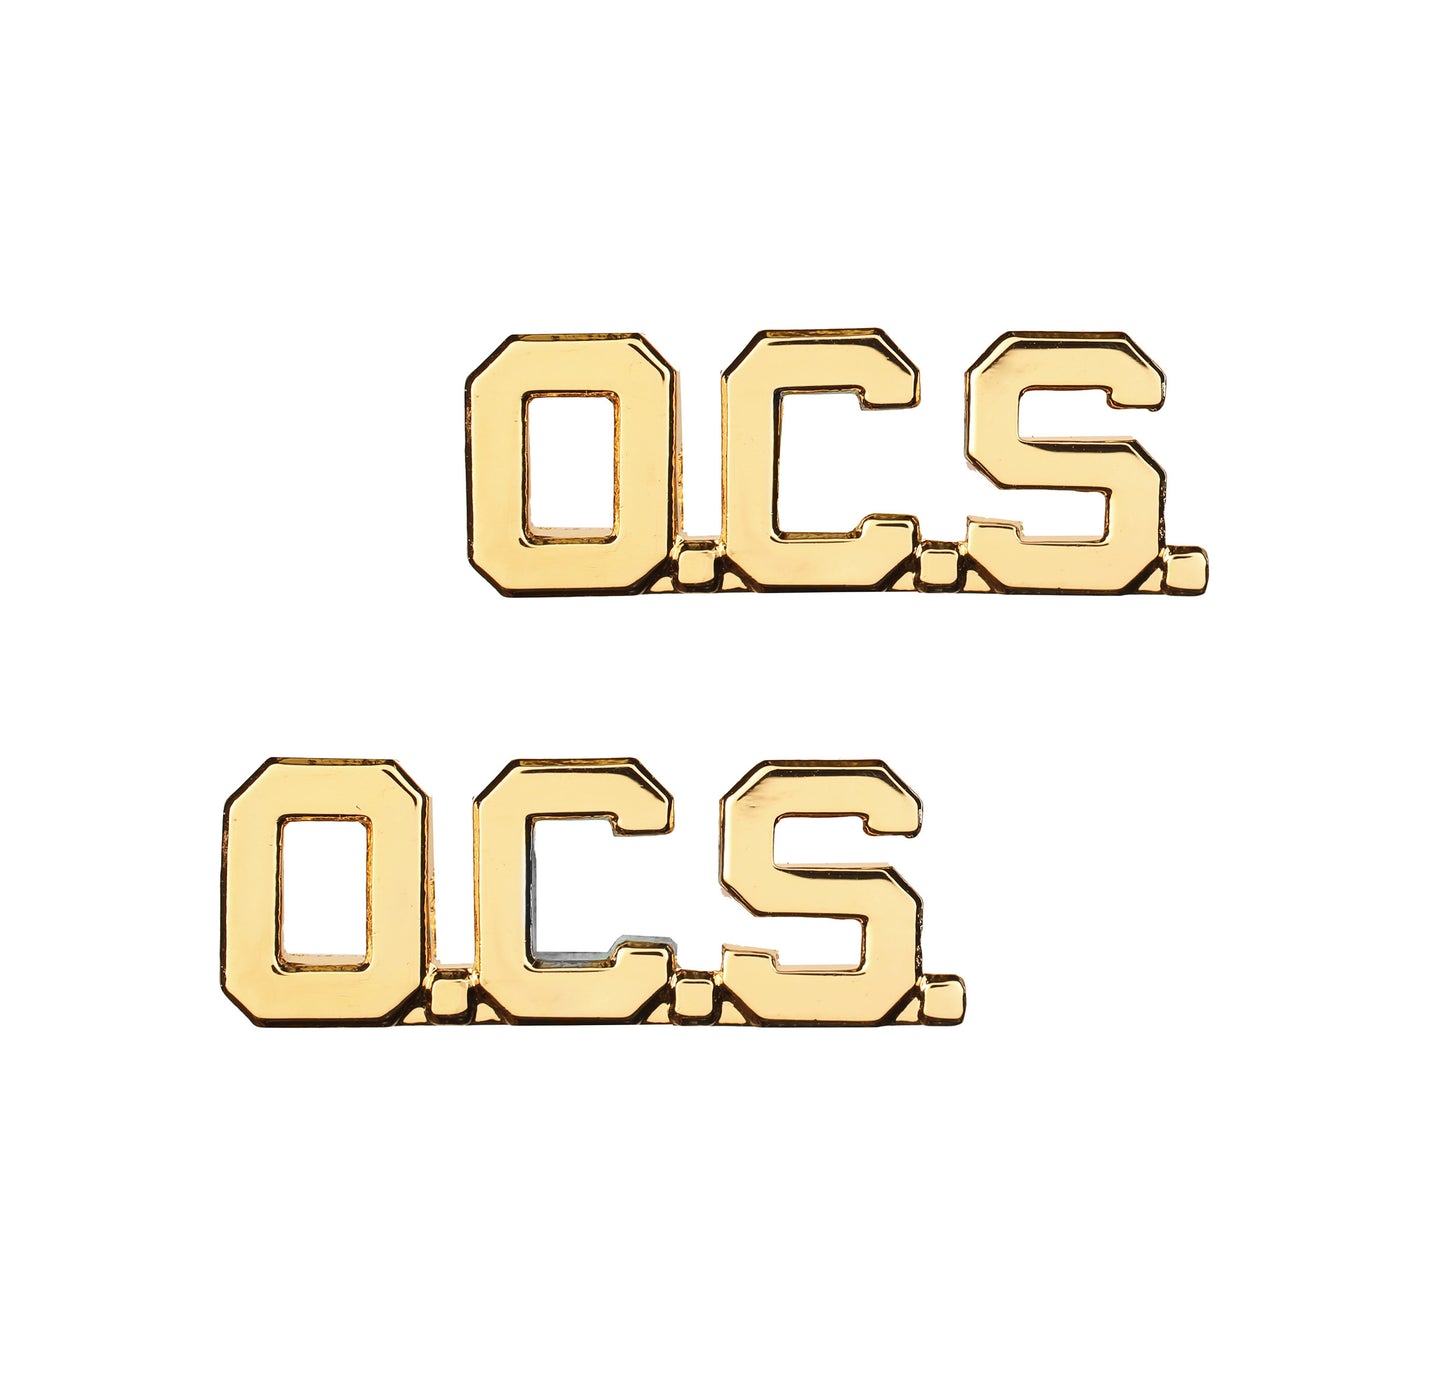 US Army OCS Officer Candidate School O.C.S. STA-BRITE® Pin-on Rank